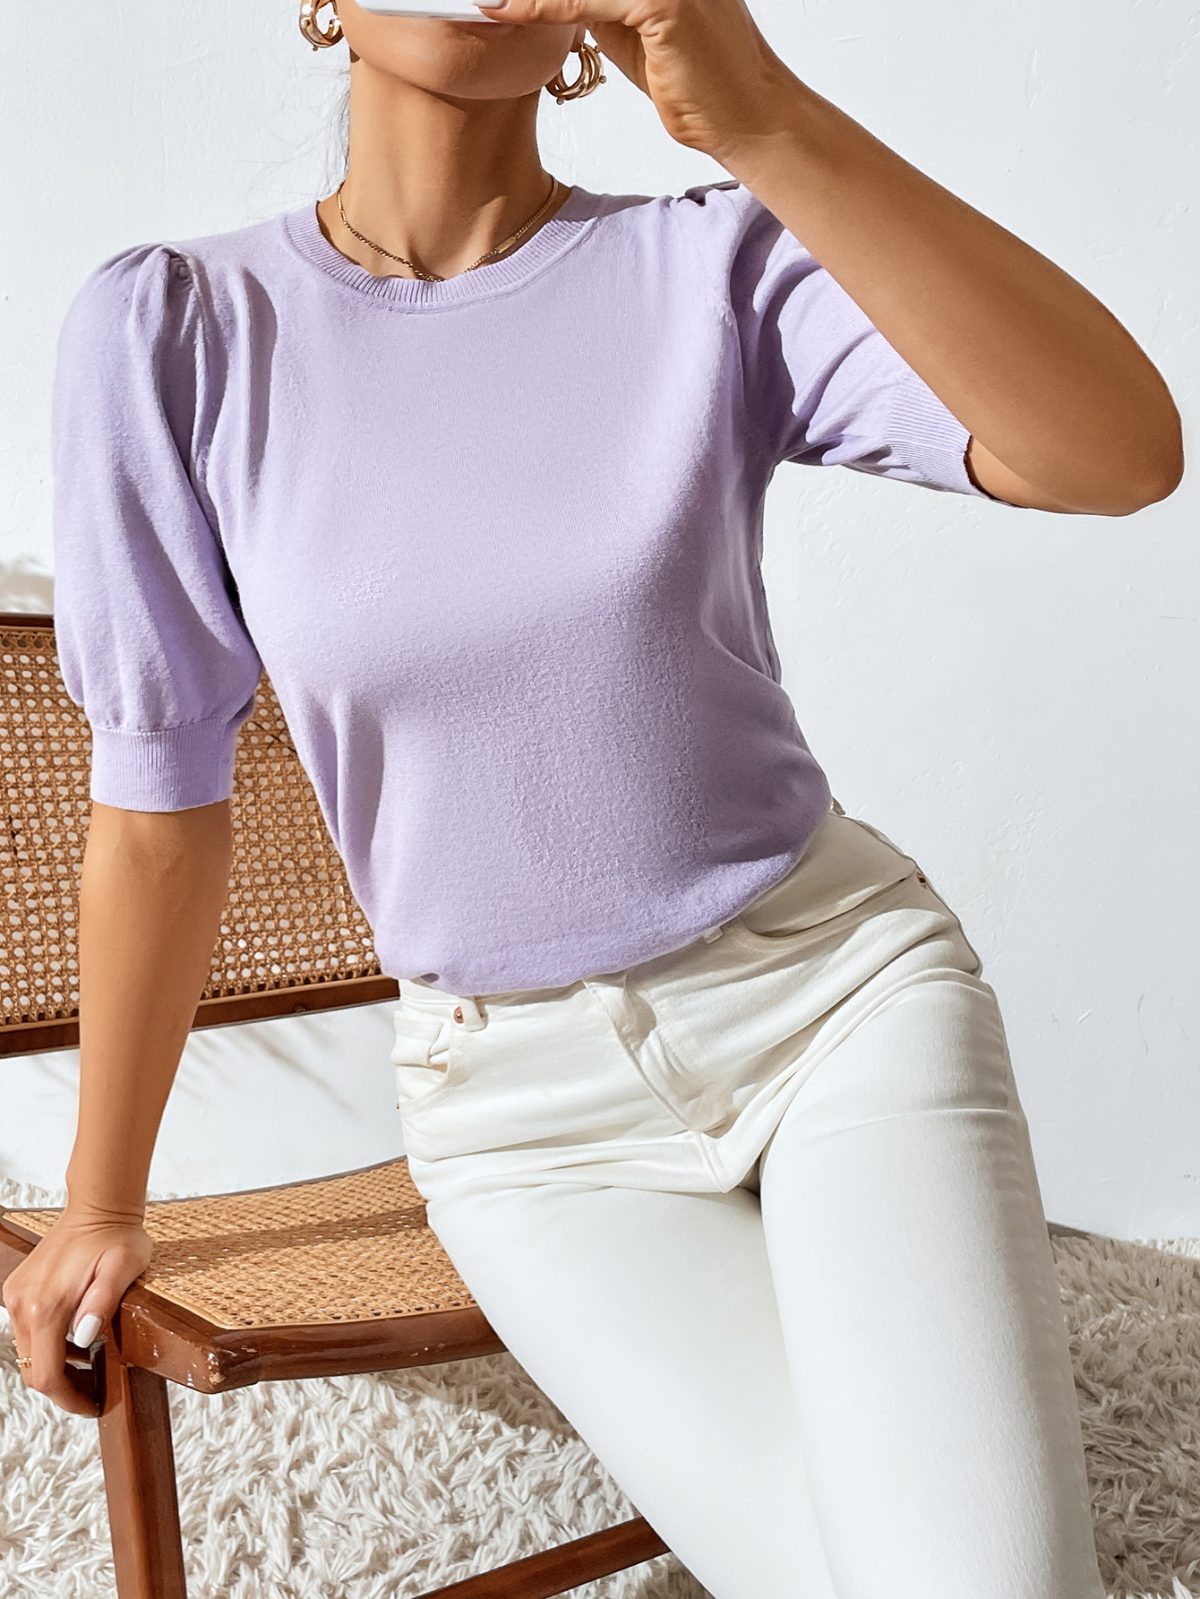 Round Neck Knitted Pleated Short Sleeve Solid Color Sweater in Sweaters